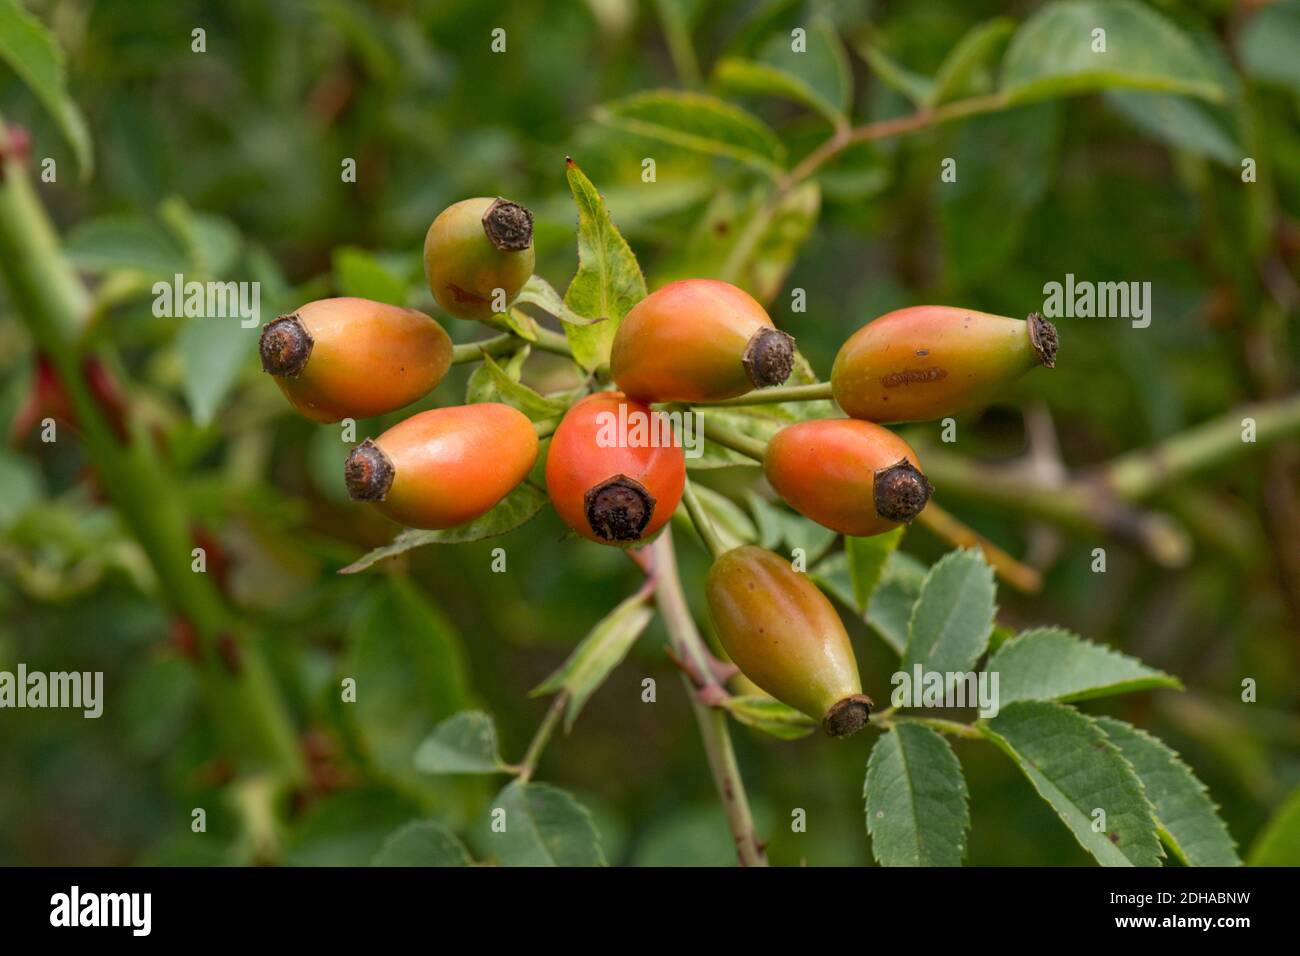 Ripening red yellow fruit, hips, of a wild dog rose (Rosa canina) high in vitamin C, B & E and antioxidants, they are used medicinally and for cooking Stock Photo